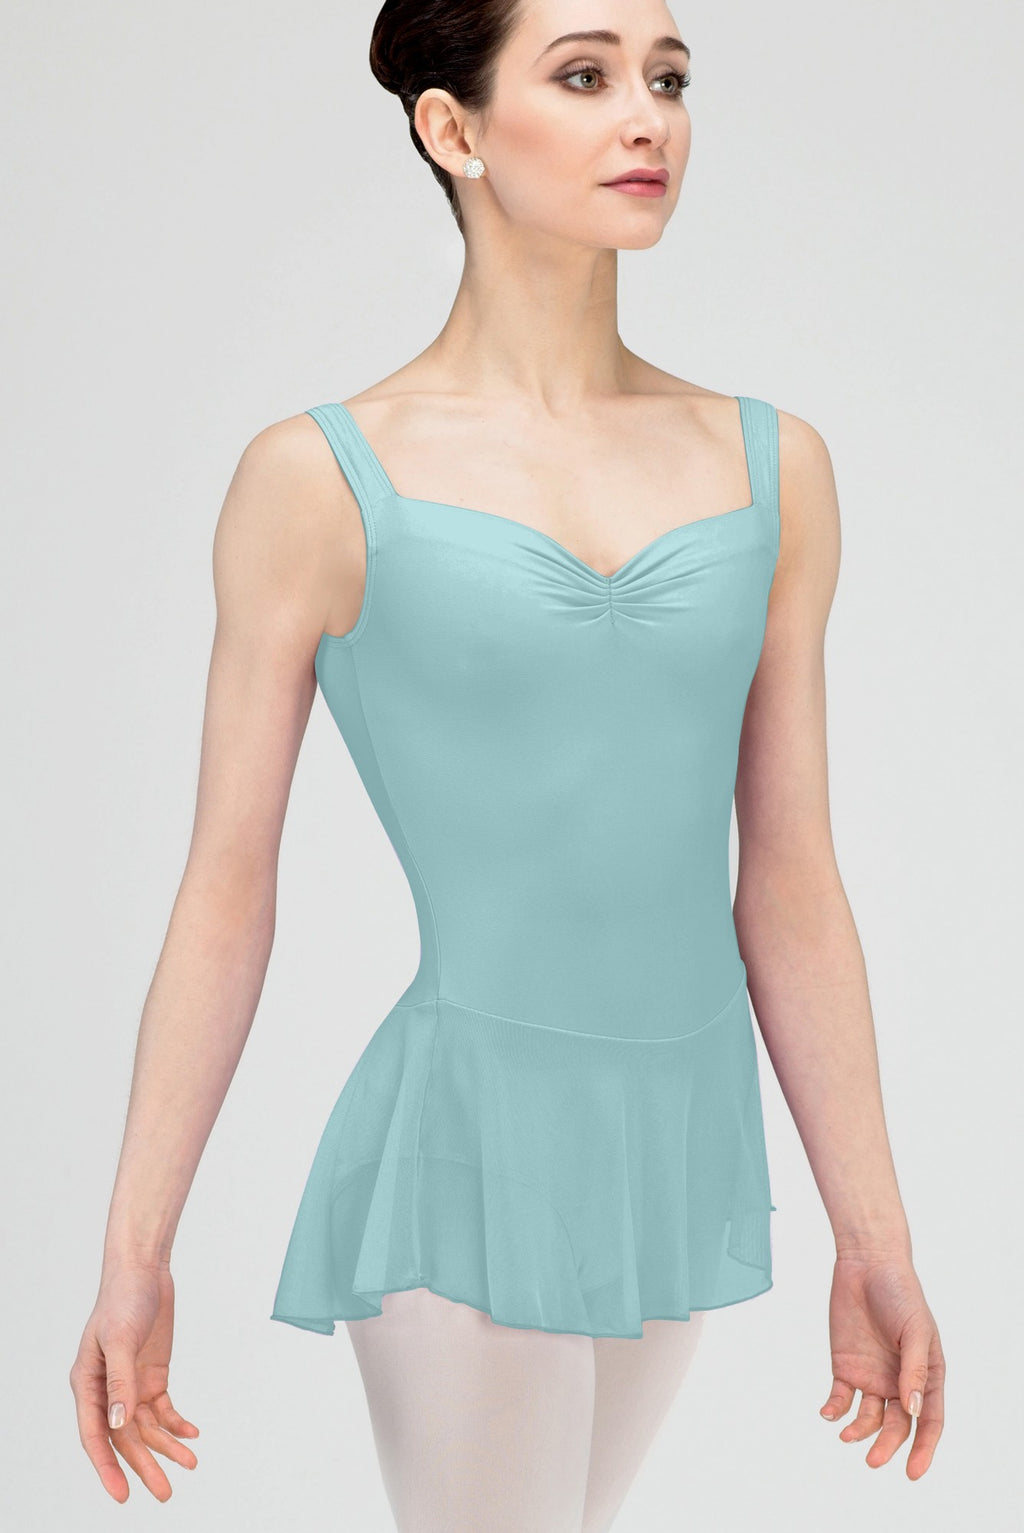 Capezio Camisole Empire Dress Dance Costume, Elegant Dance Costumes With  Leotard & Flowing Georgette Skirt, Sleeveless Dress For Women, Ideal For  Lyrical & Ballet Dance - Light Blue, XS (Xtra Small) 